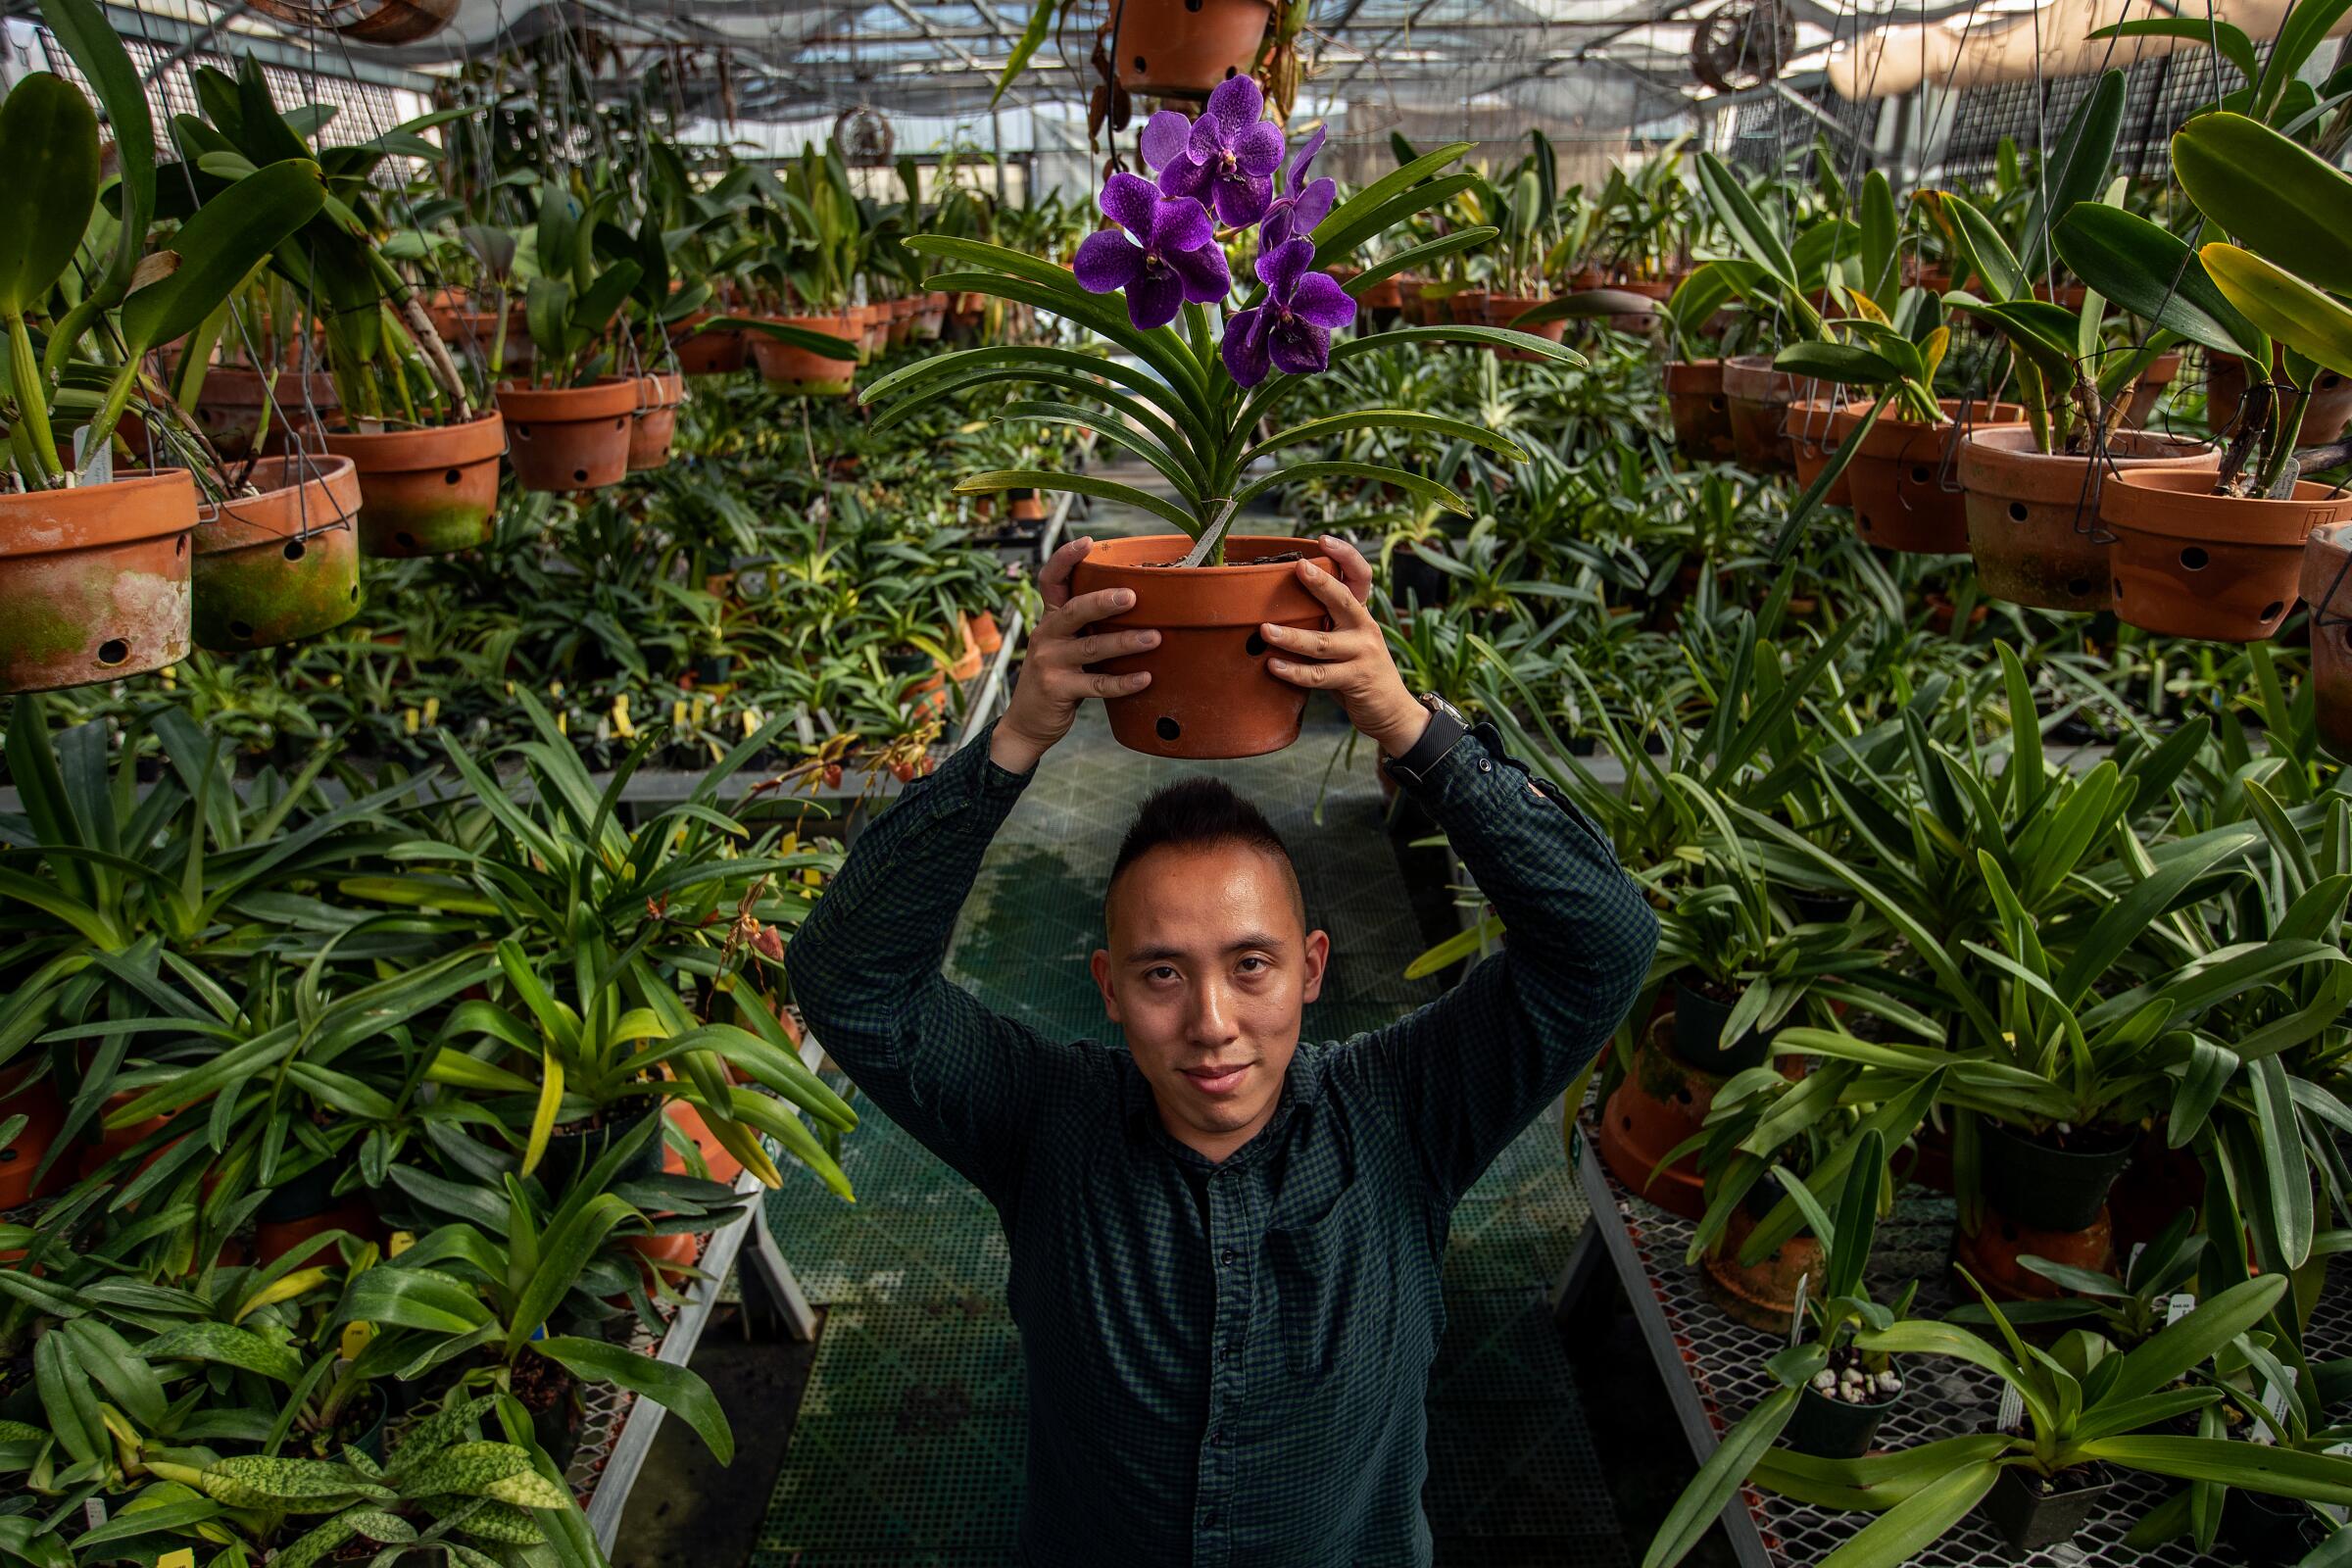 Brandon Tam holds a potted Vanda orchid over his head inside a greenhouse full of orchids.